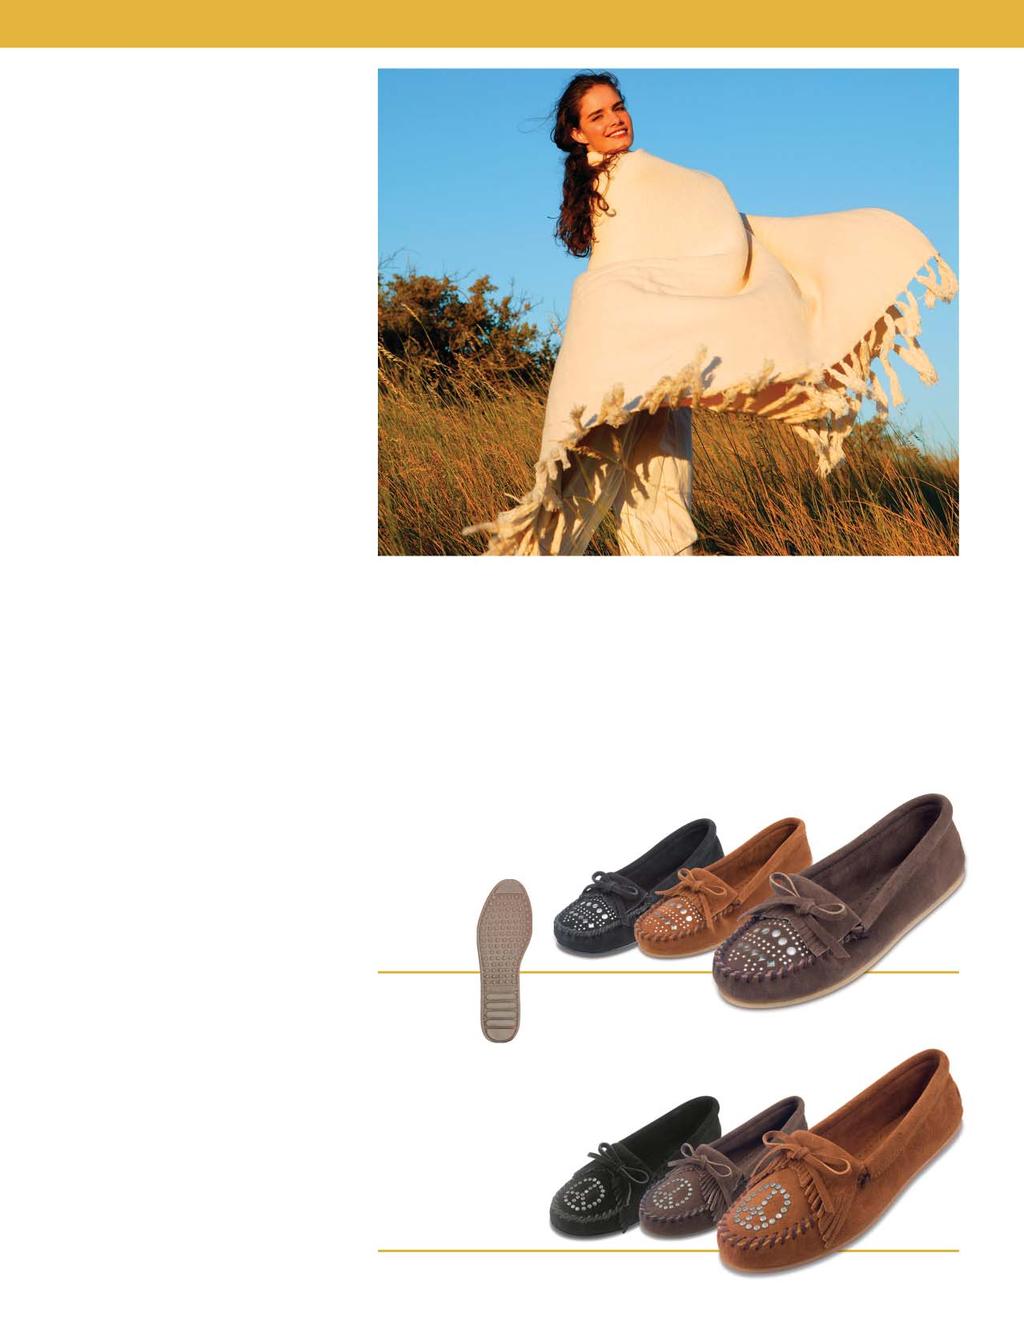 1946 The finest in moccasins and casual footwear. 2011 Women's Moccasins... p4 Thunderbird... p5 hide Moccasins... p6-7 Women's Moccasins... p8-9 s... p10-11 s... p12-13 Men s Moccasins.